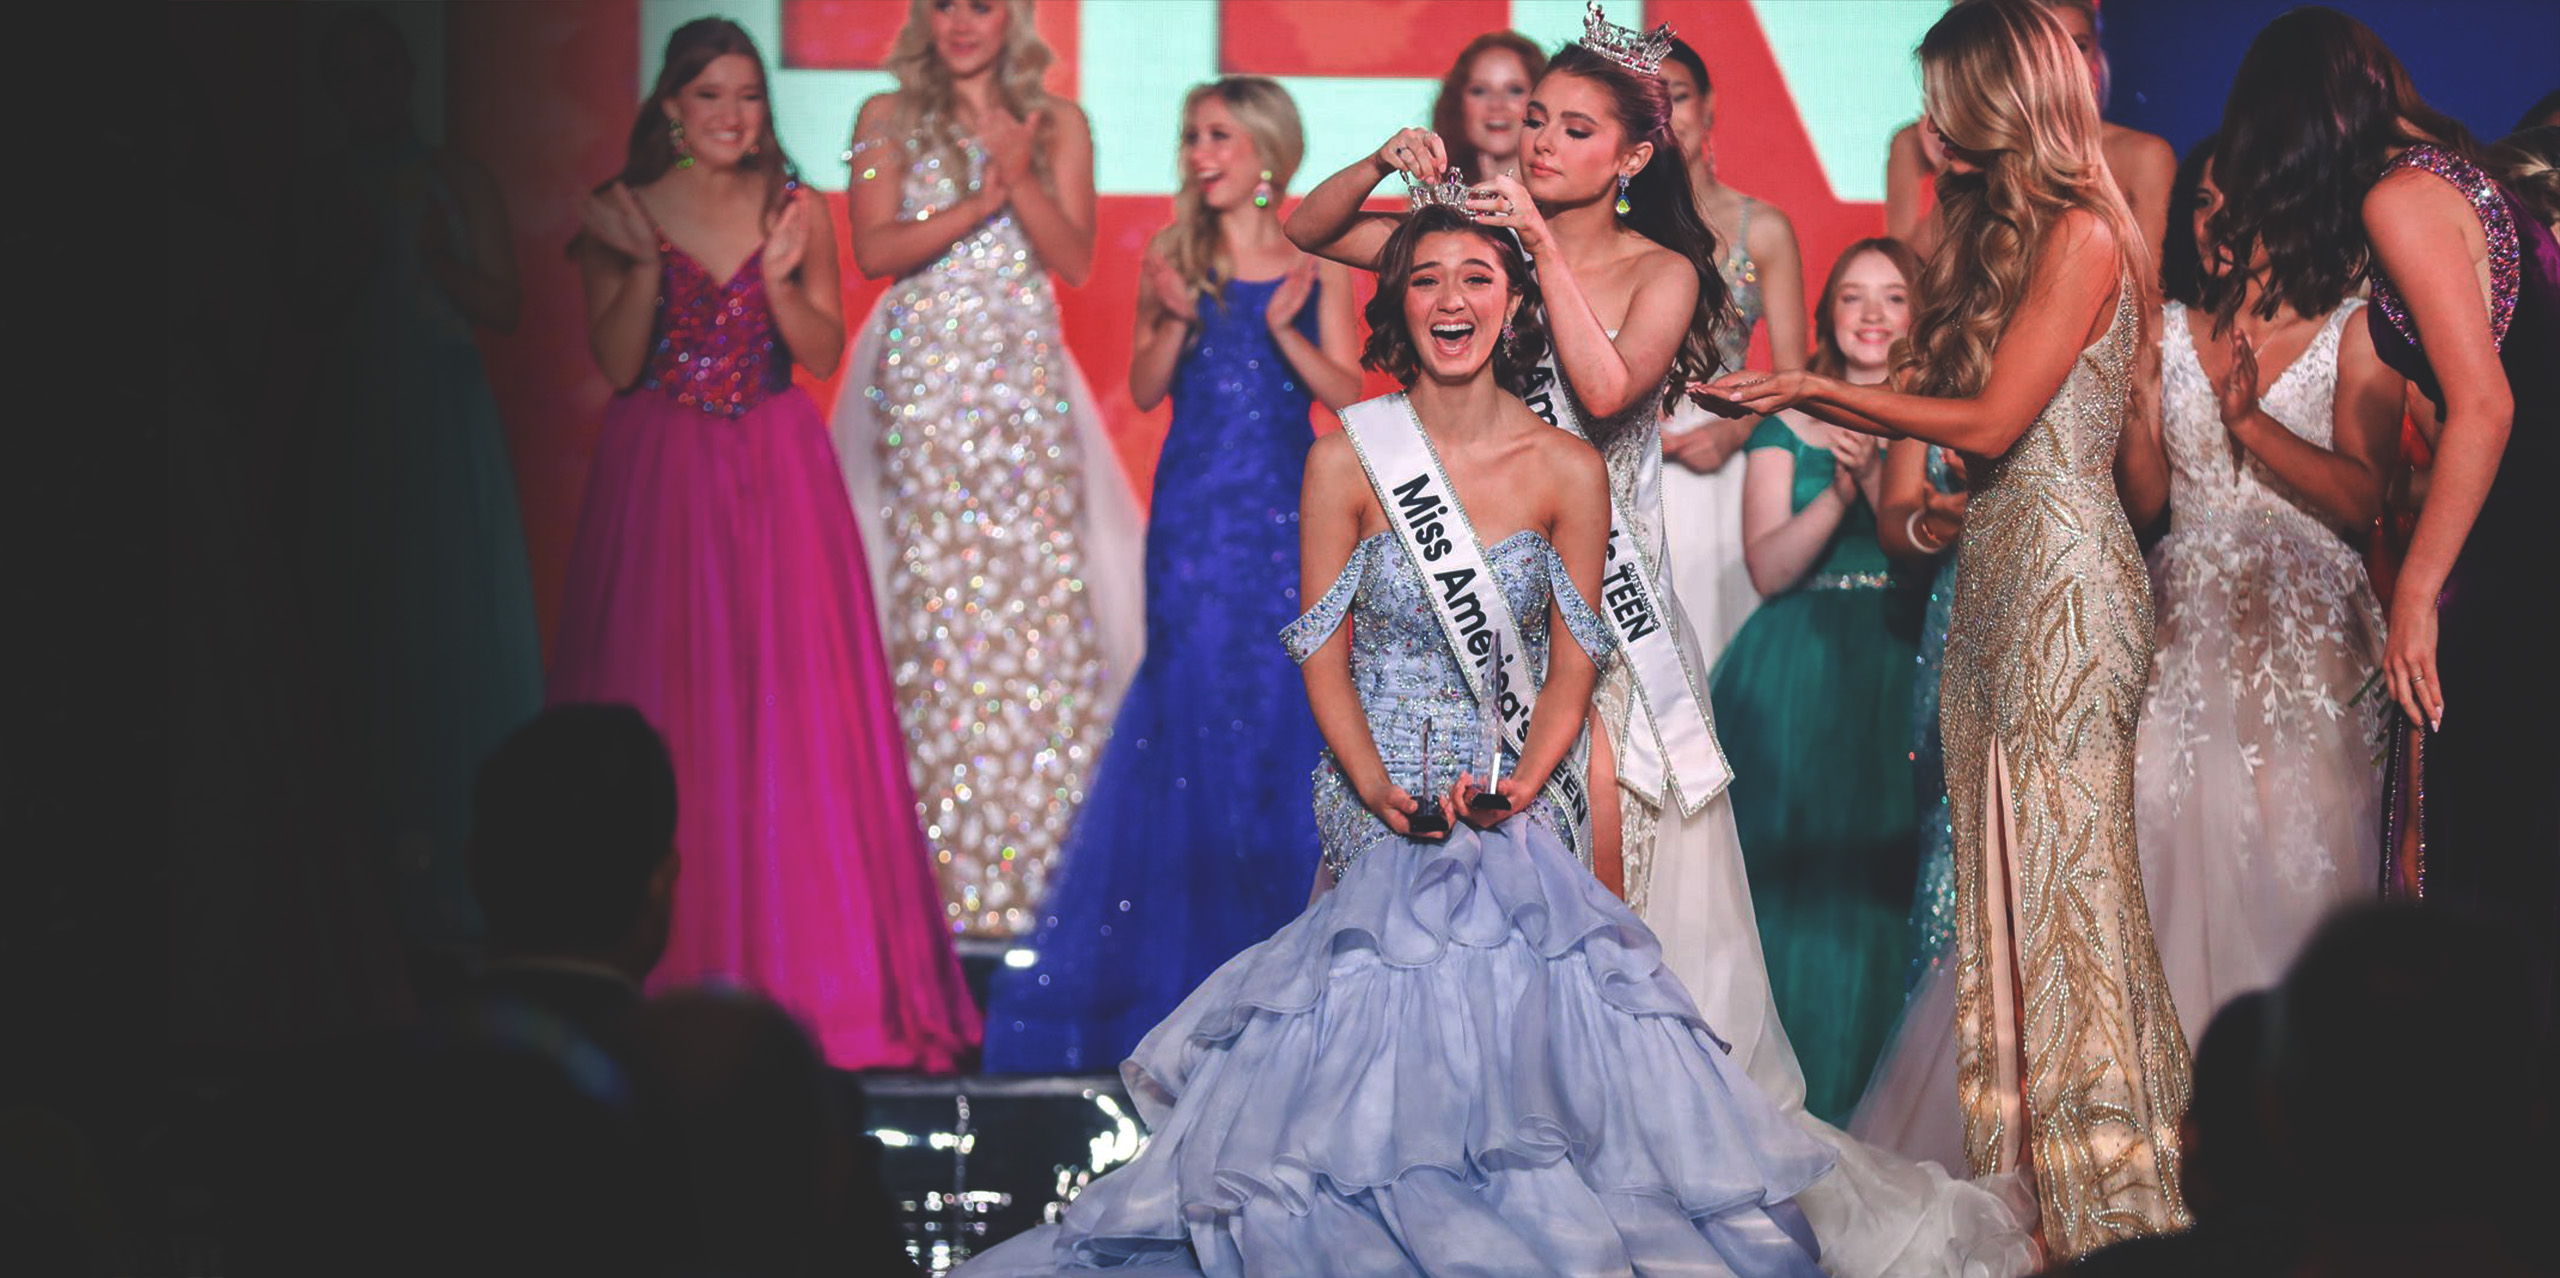 Morgan Greco Walking the Stage after being crowned Miss America's Outstanding Teen